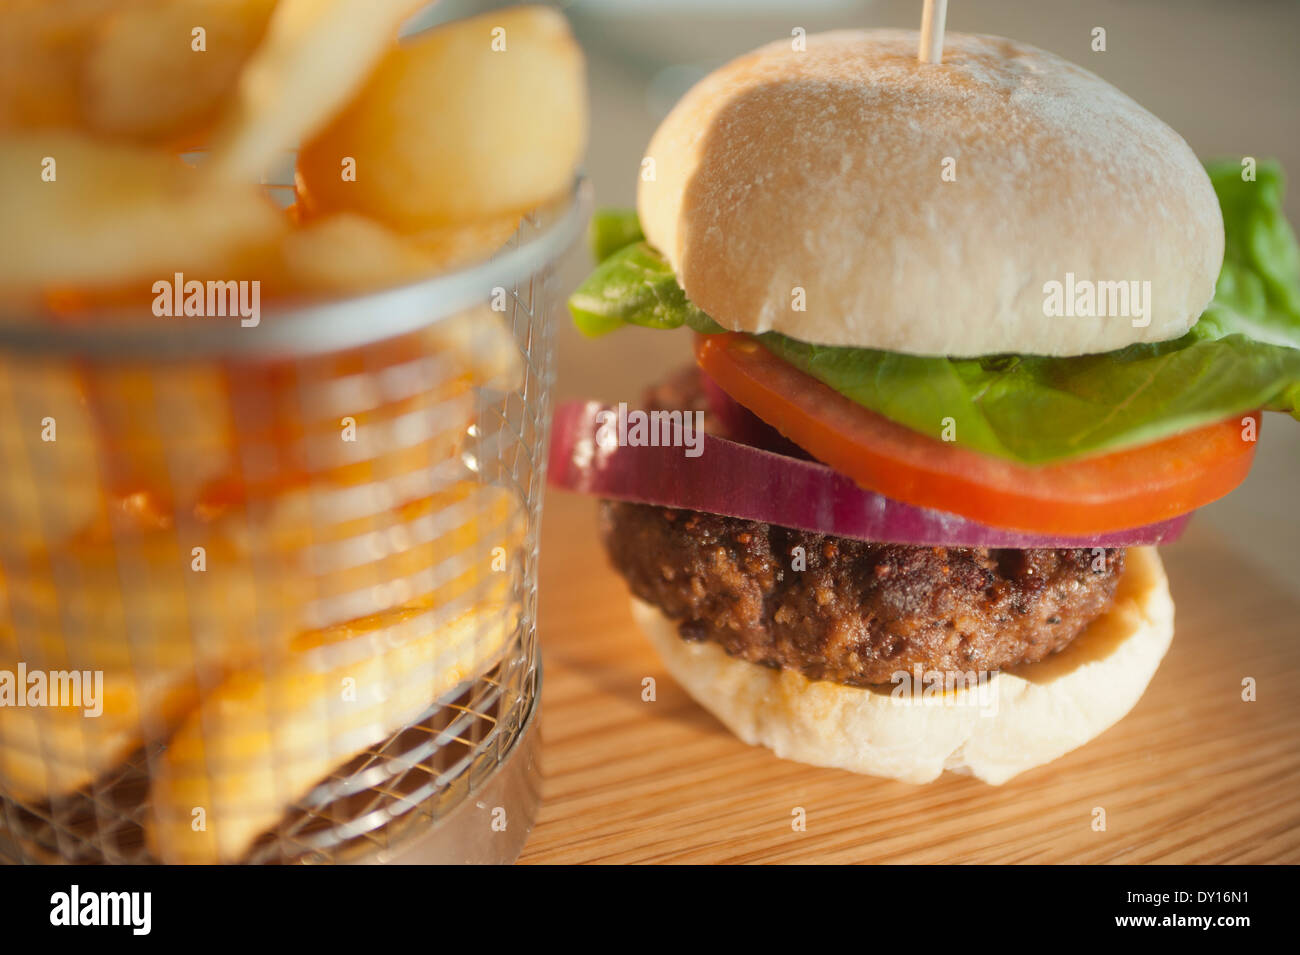 Classic burger with onion tomato and lettuce in a white bread bun with a side order of chips or French fried potatoes. Stock Photo